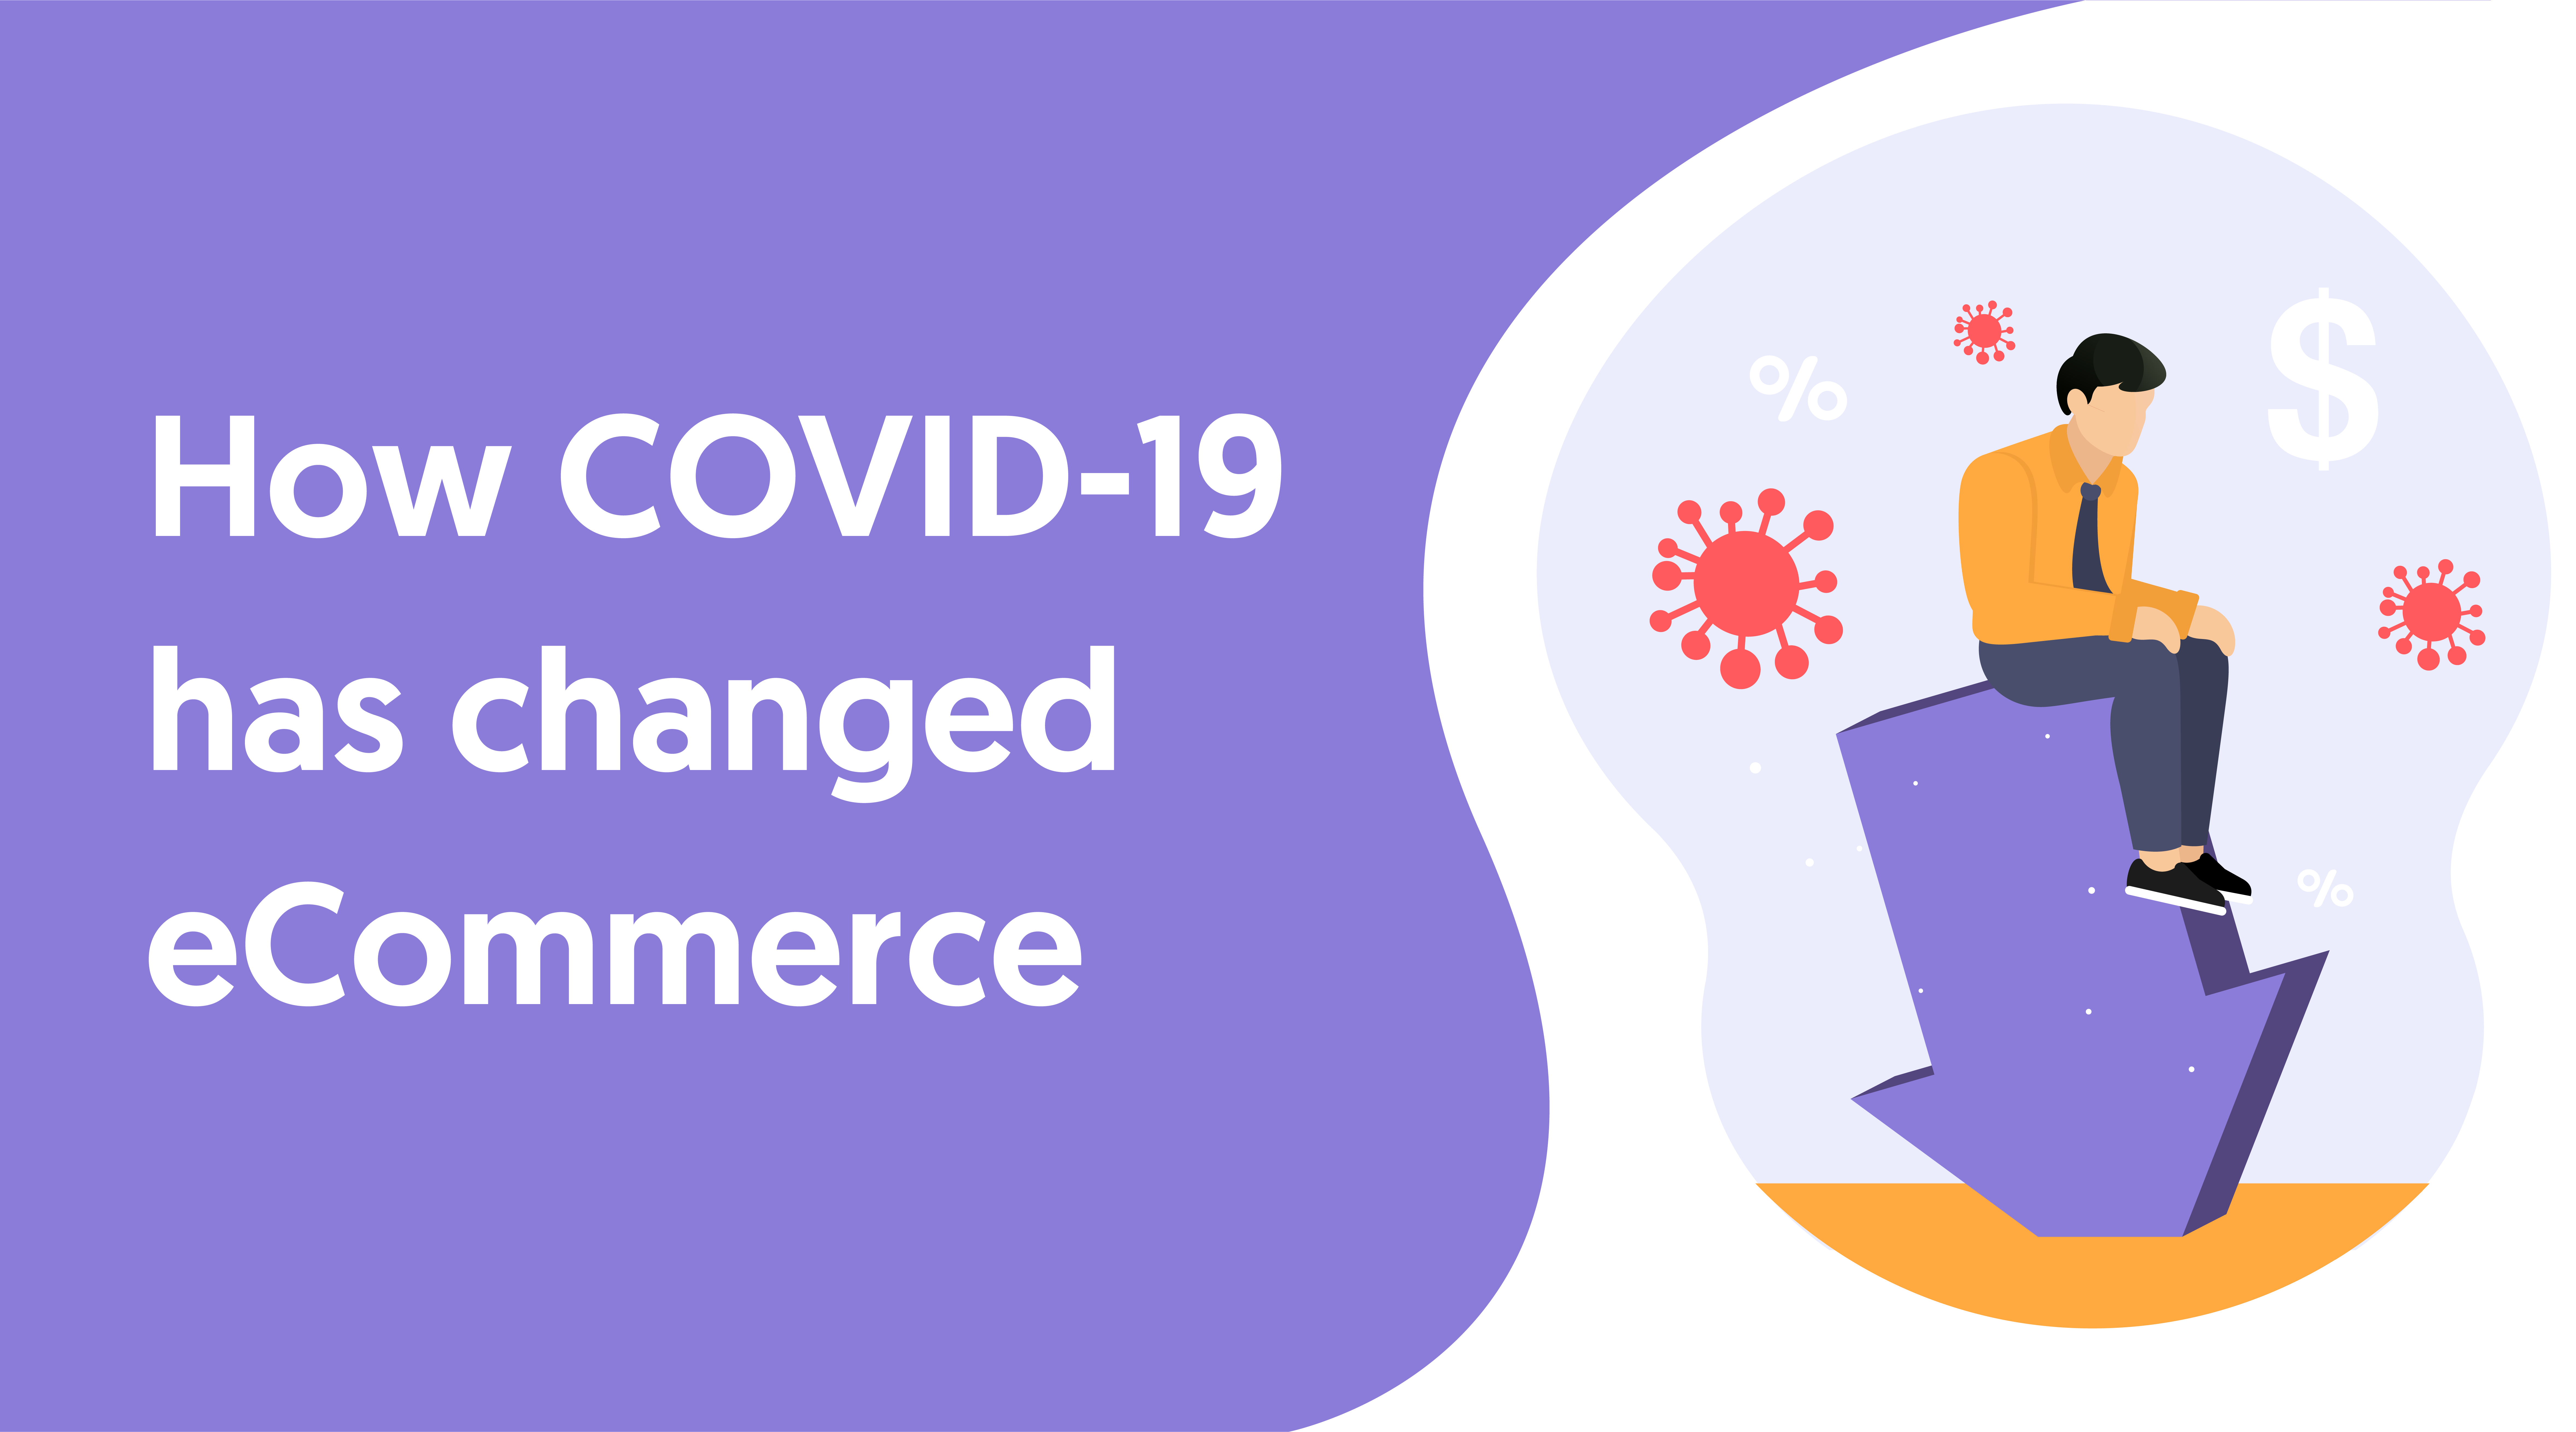 How COVID-19 has changed eCommerce